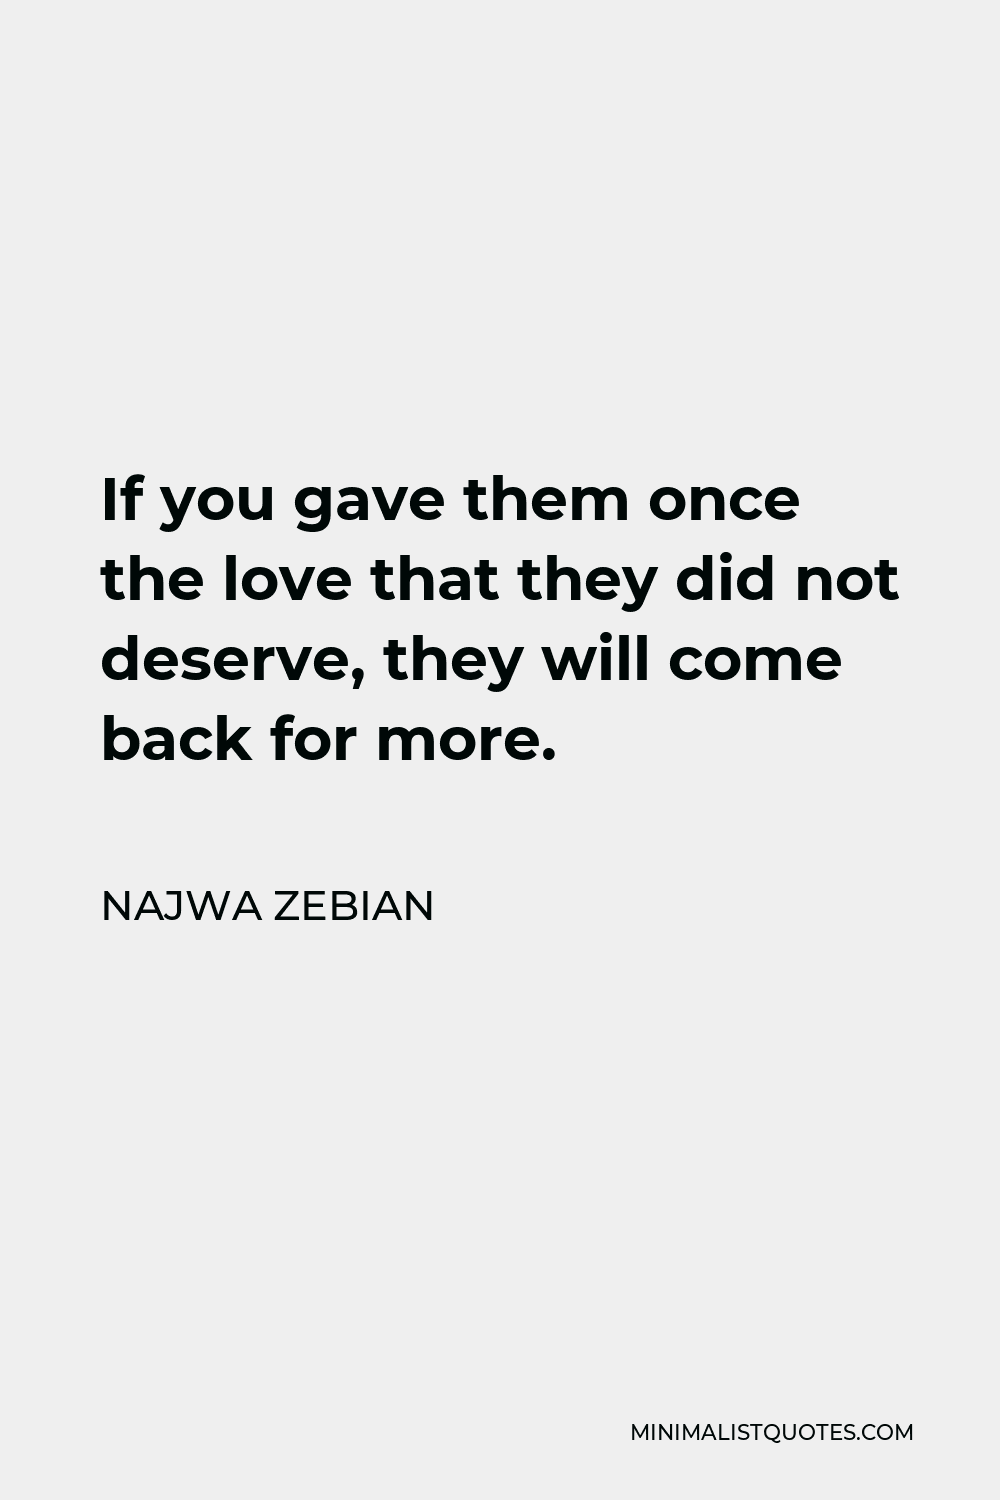 Najwa Zebian Quote - If you gave them once the love that they did not deserve, they will come back for more.